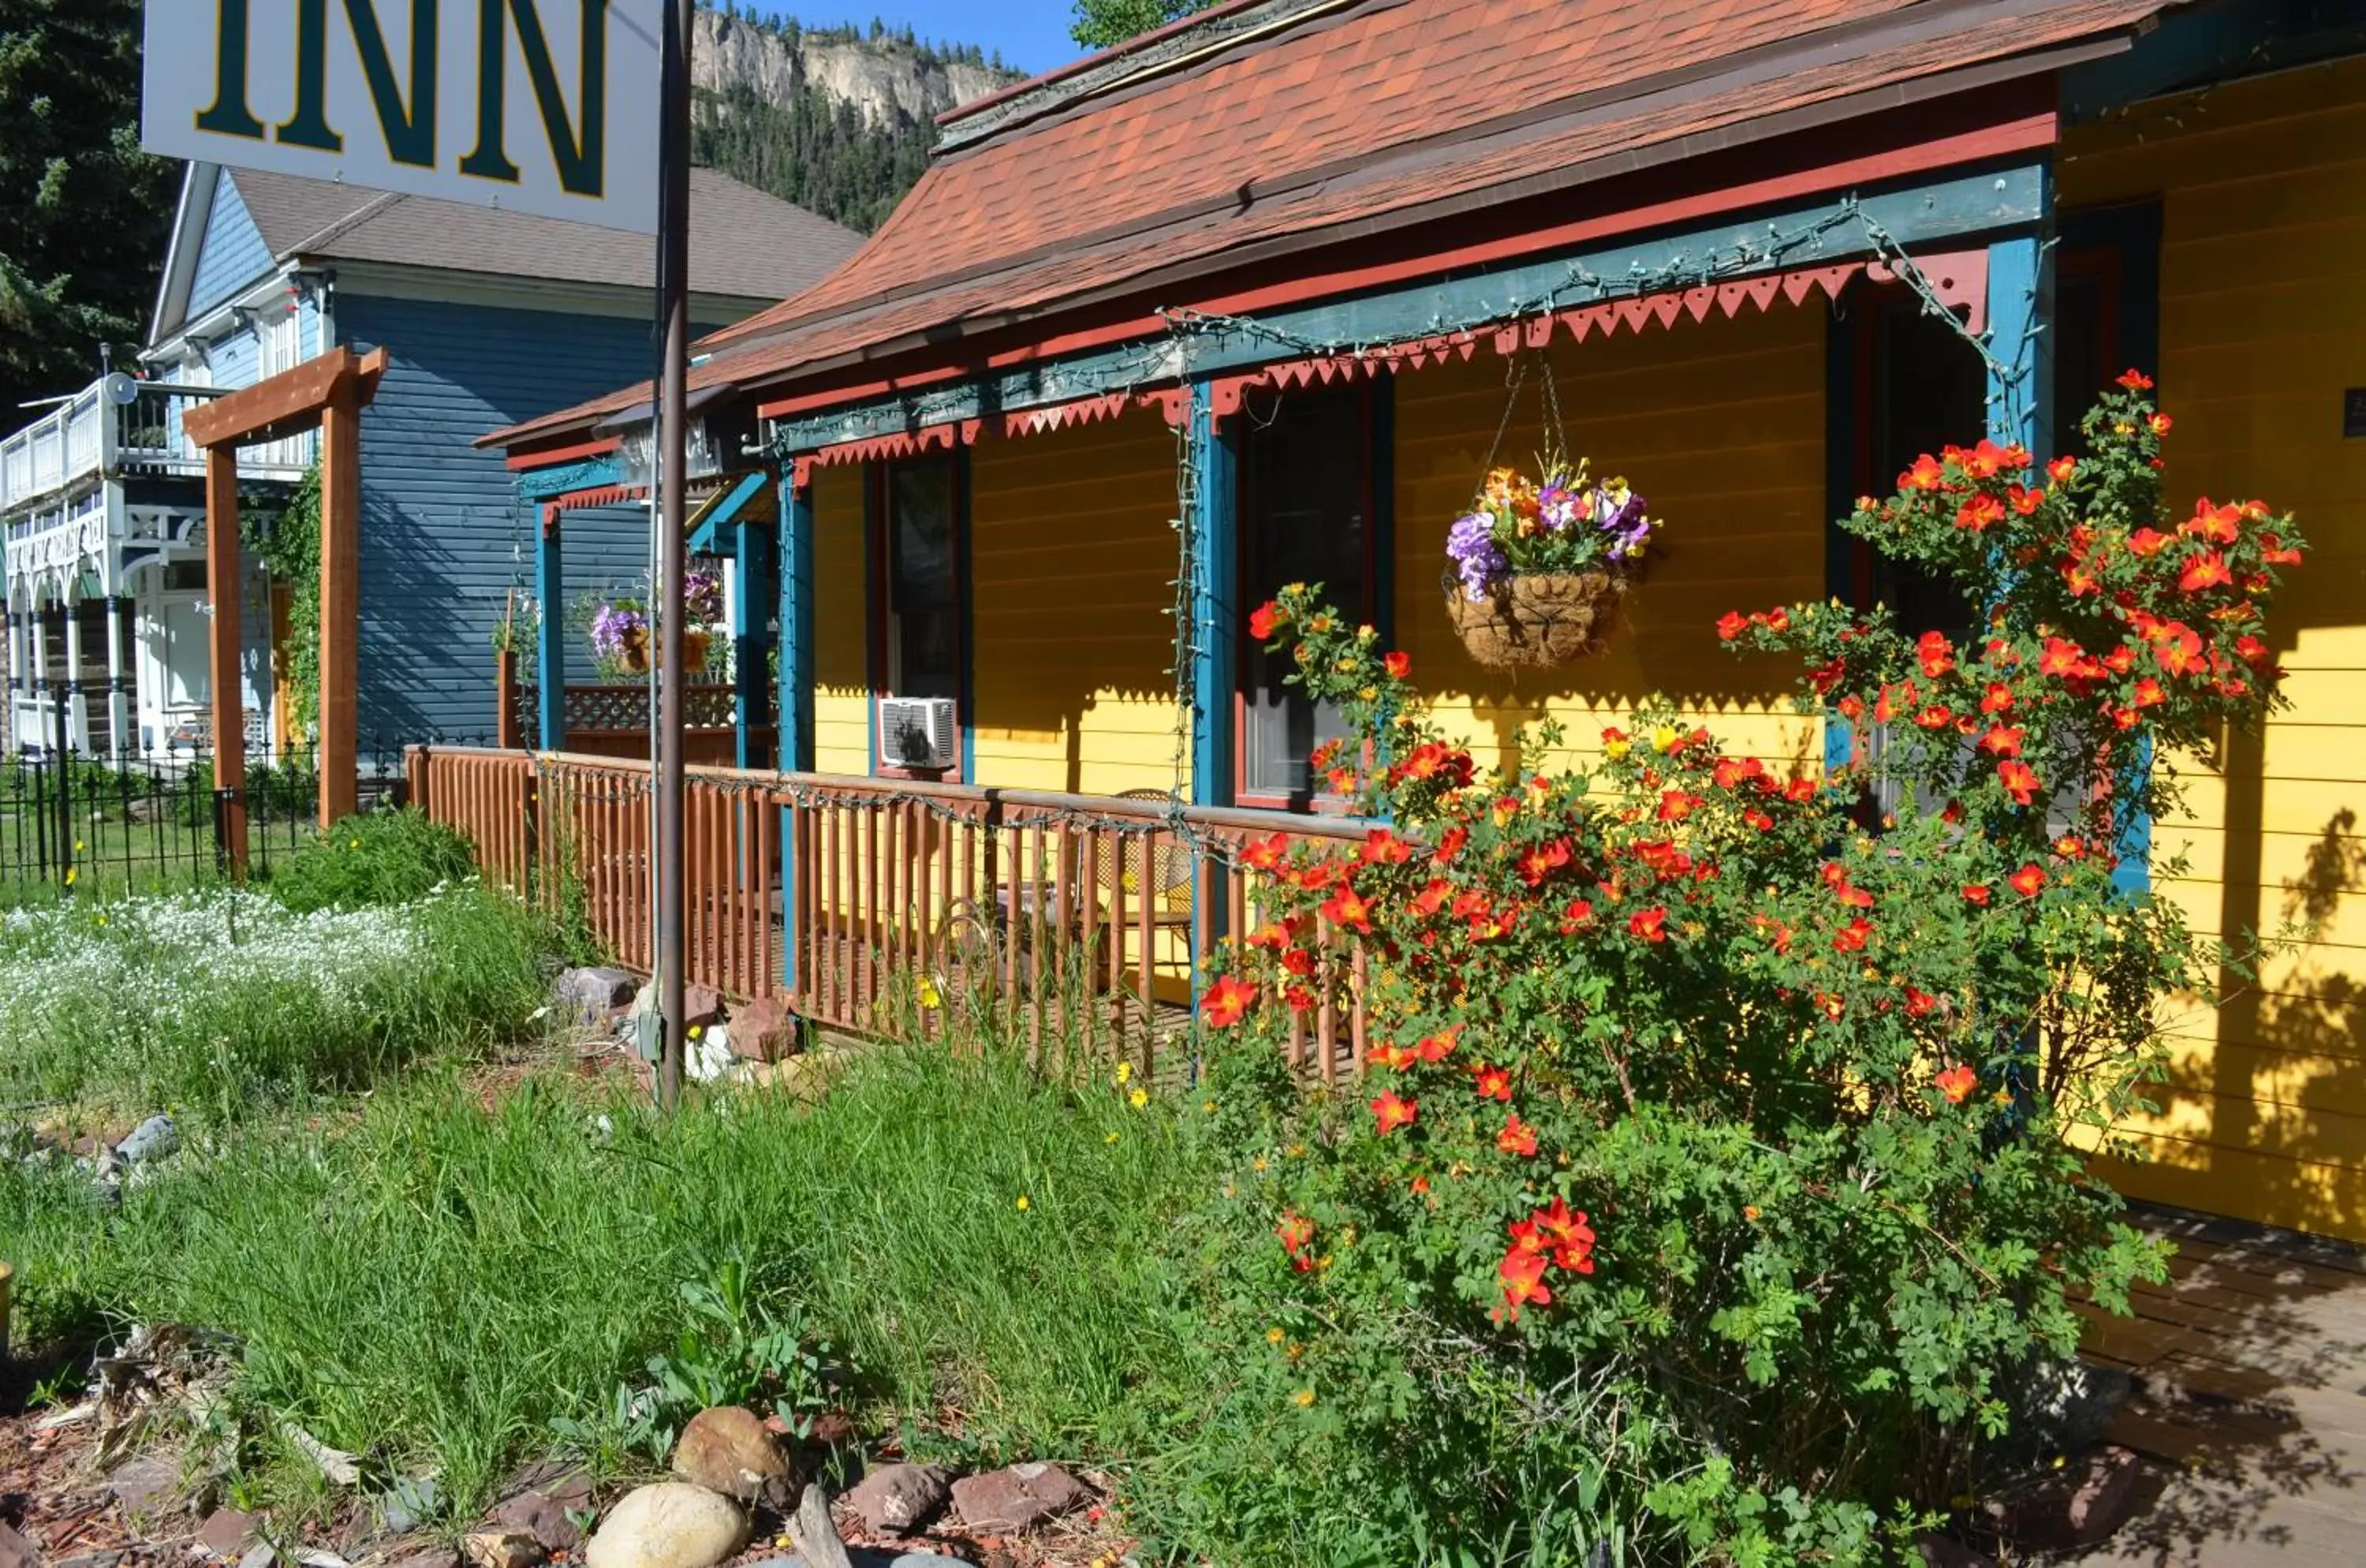 Property building in The Ouray Main Street Inn